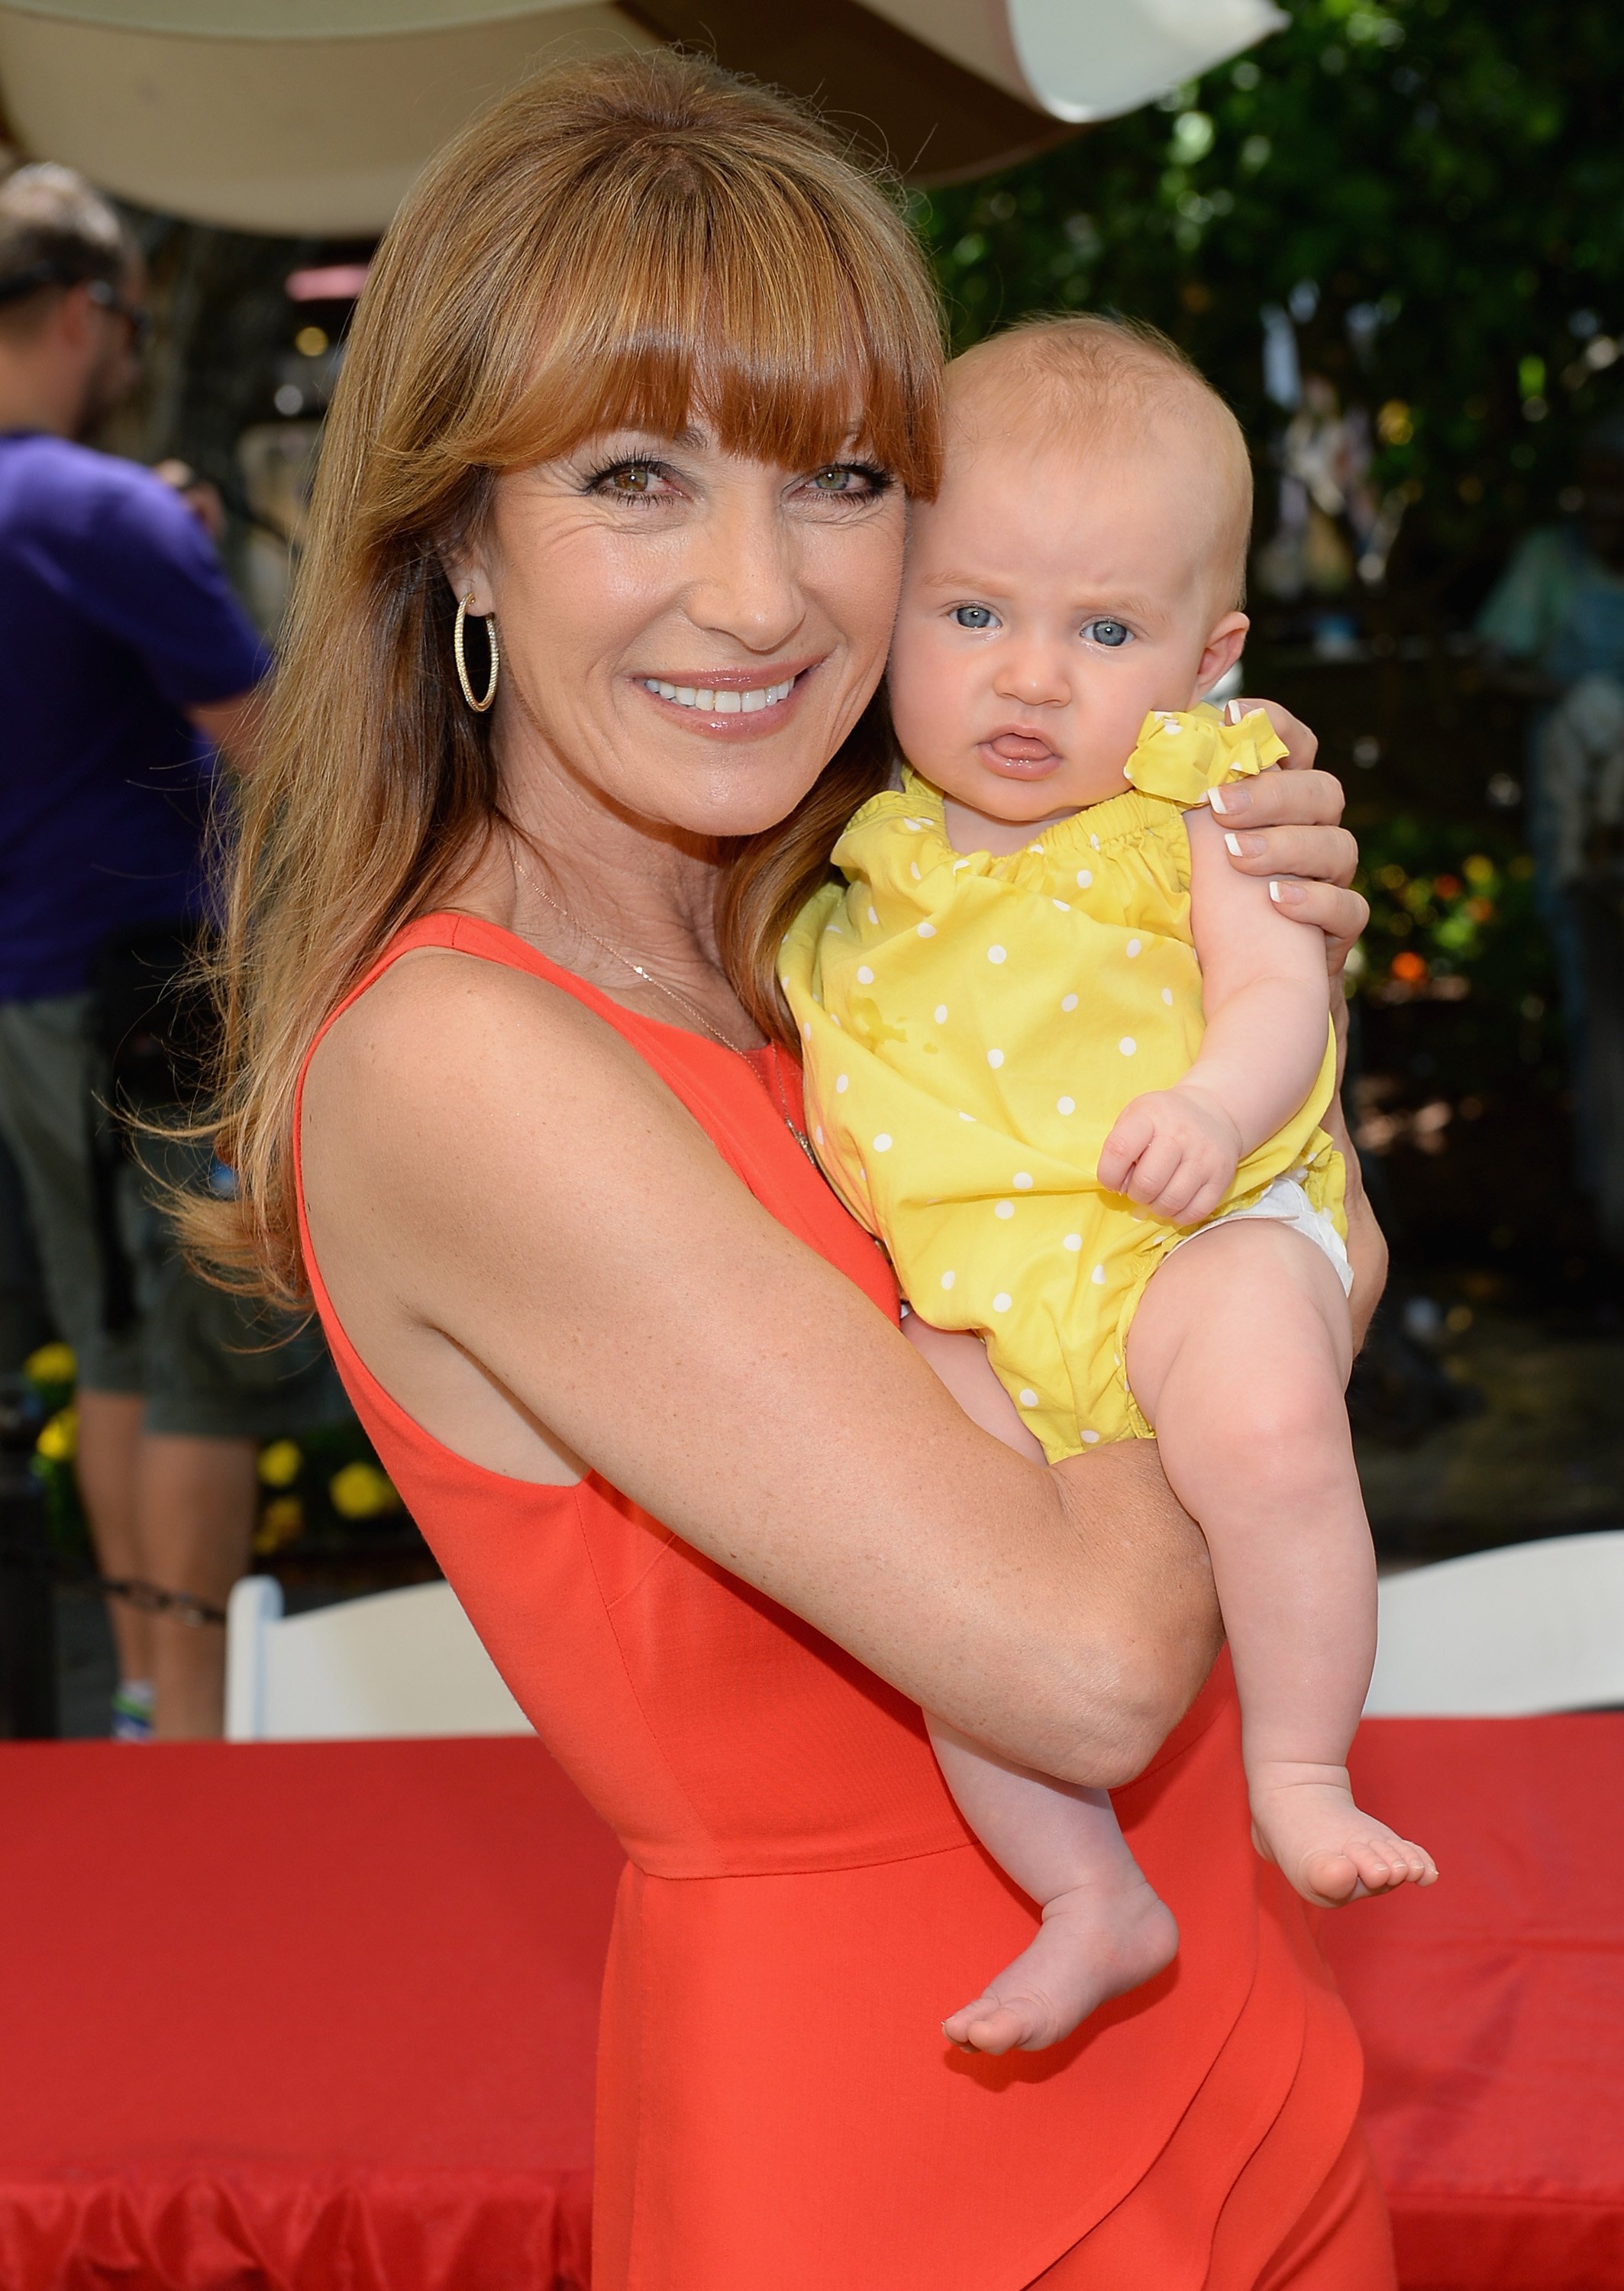 Jane Seymour and granddaughter Willa attend "An American Girl: Saige Paints The Sky" movie premiere at American Girl Place, The Grove on June 28, 2013 in Los Angeles, California | Source: Getty Images 